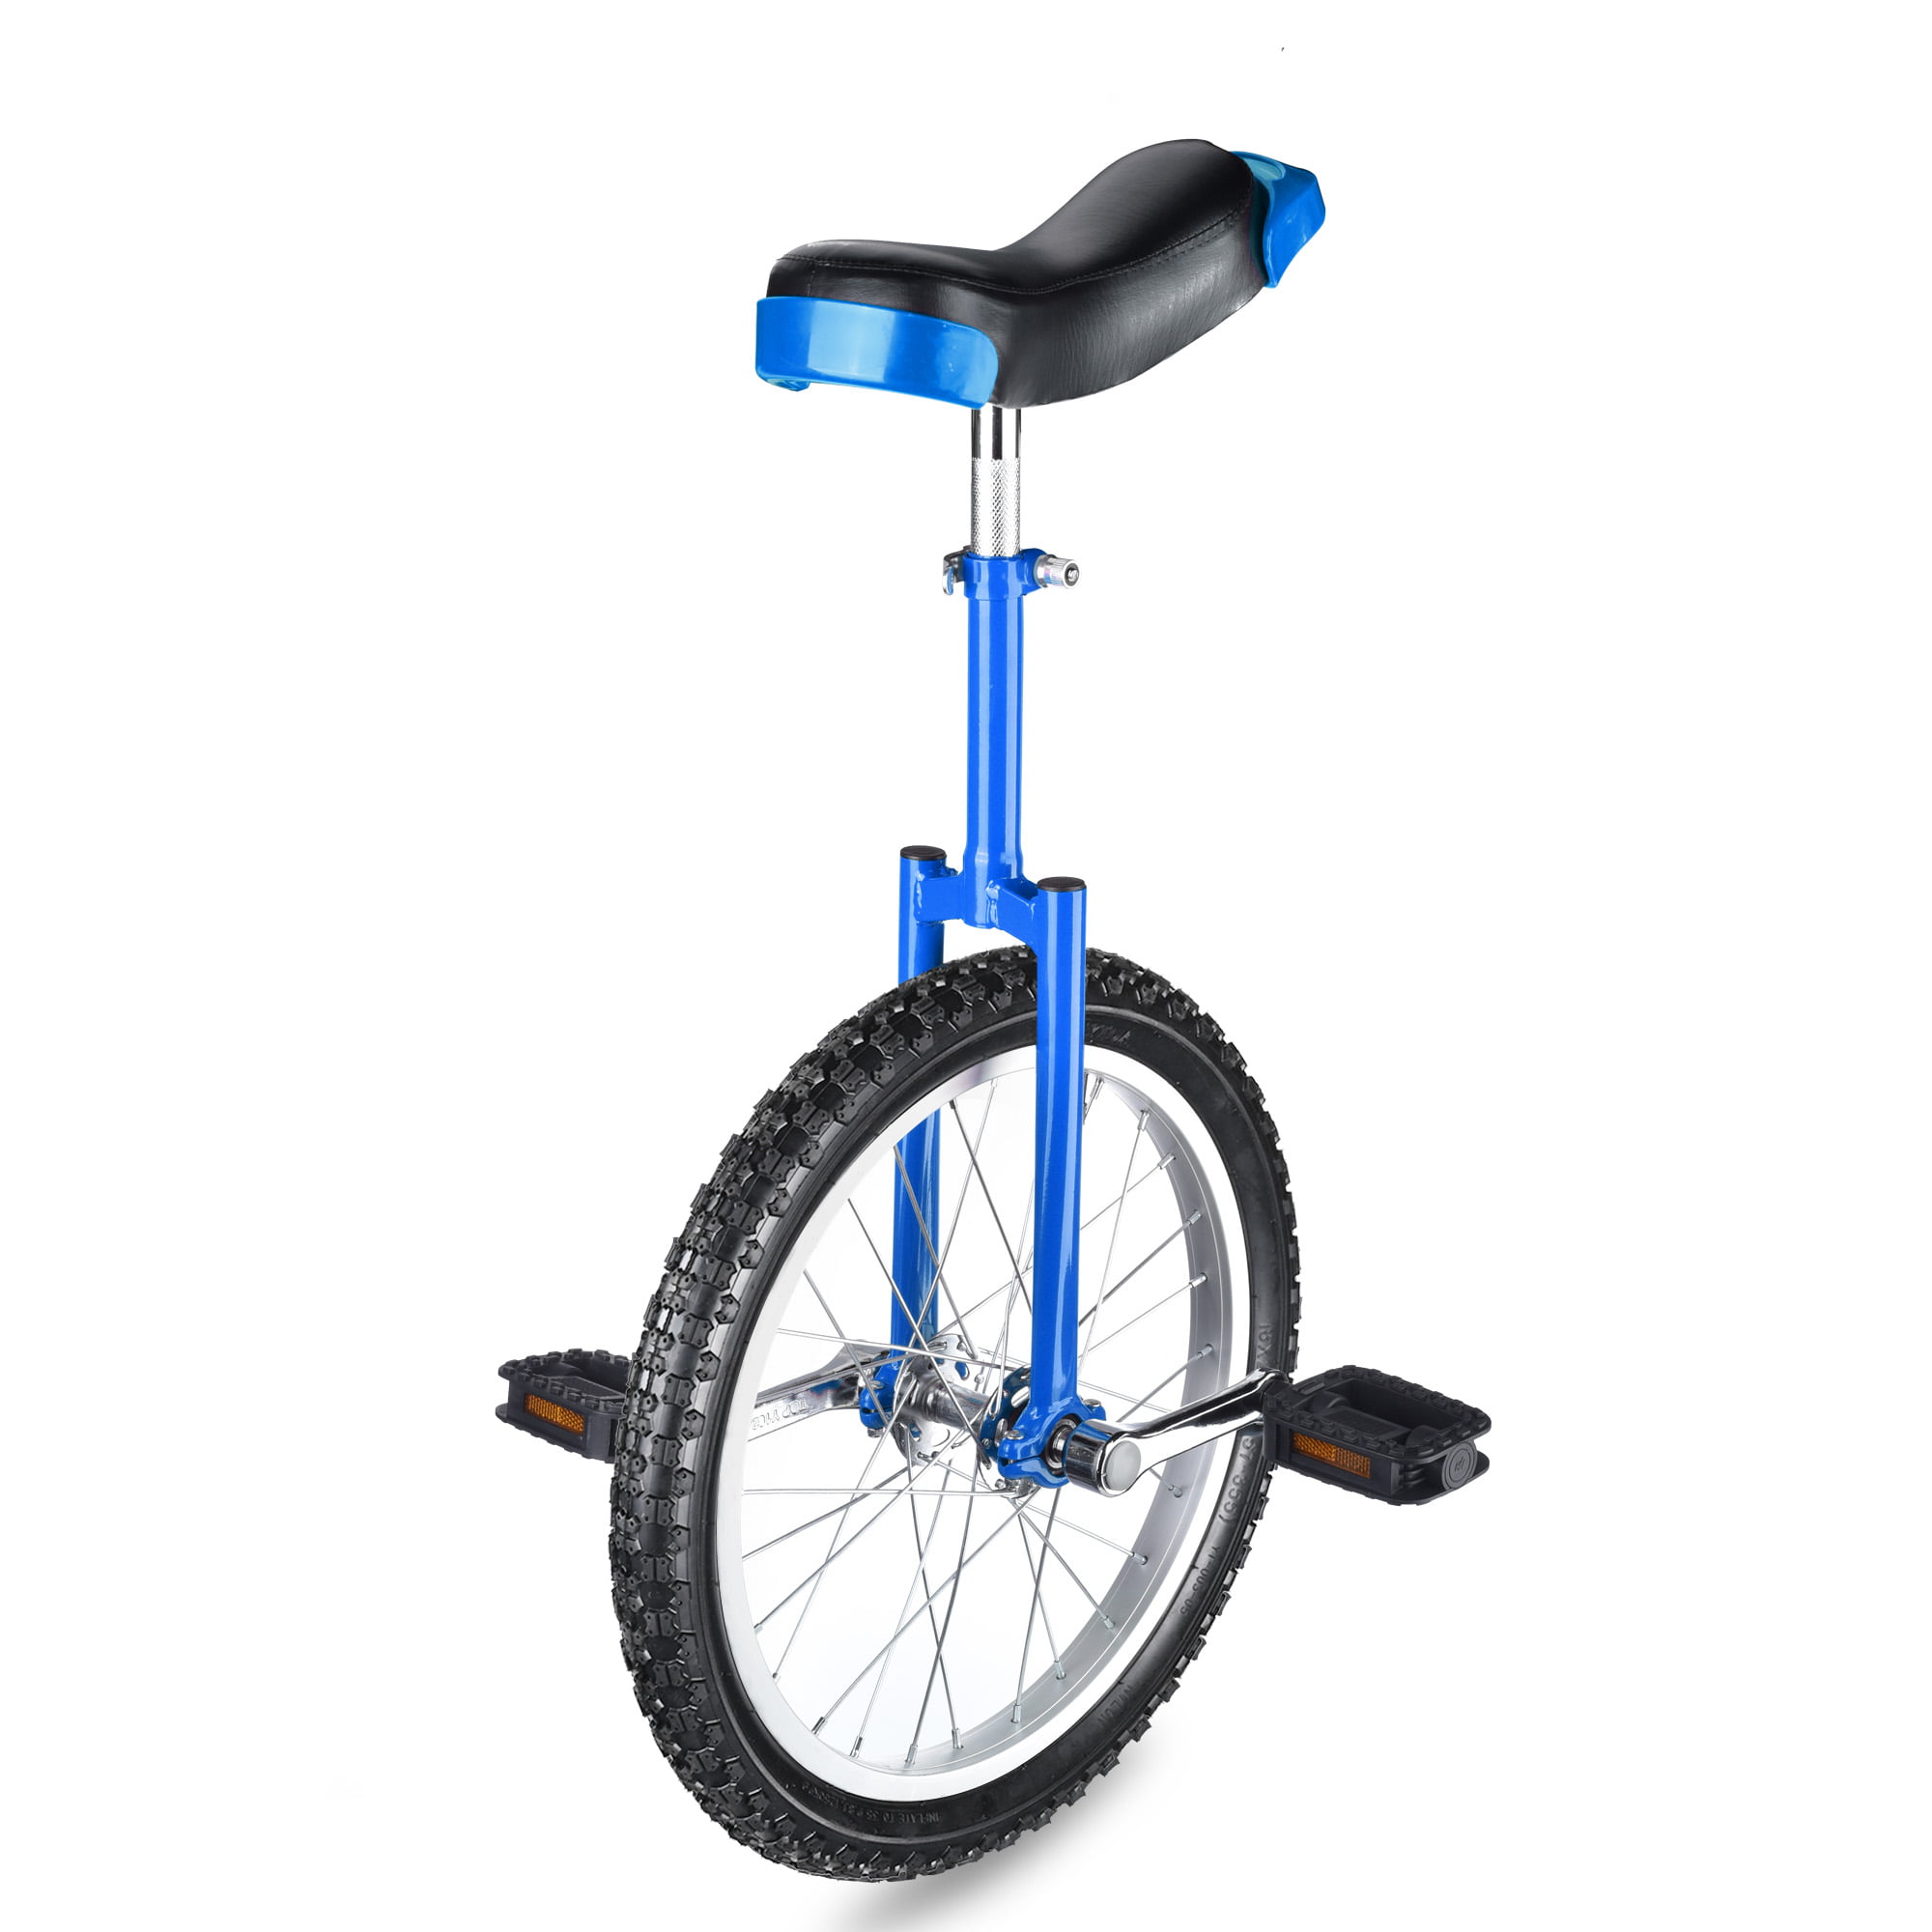 Details about   18" Butyl Tire Chrome Unicycle Wheel Cycling Mountain Exercise Balance Fitness 